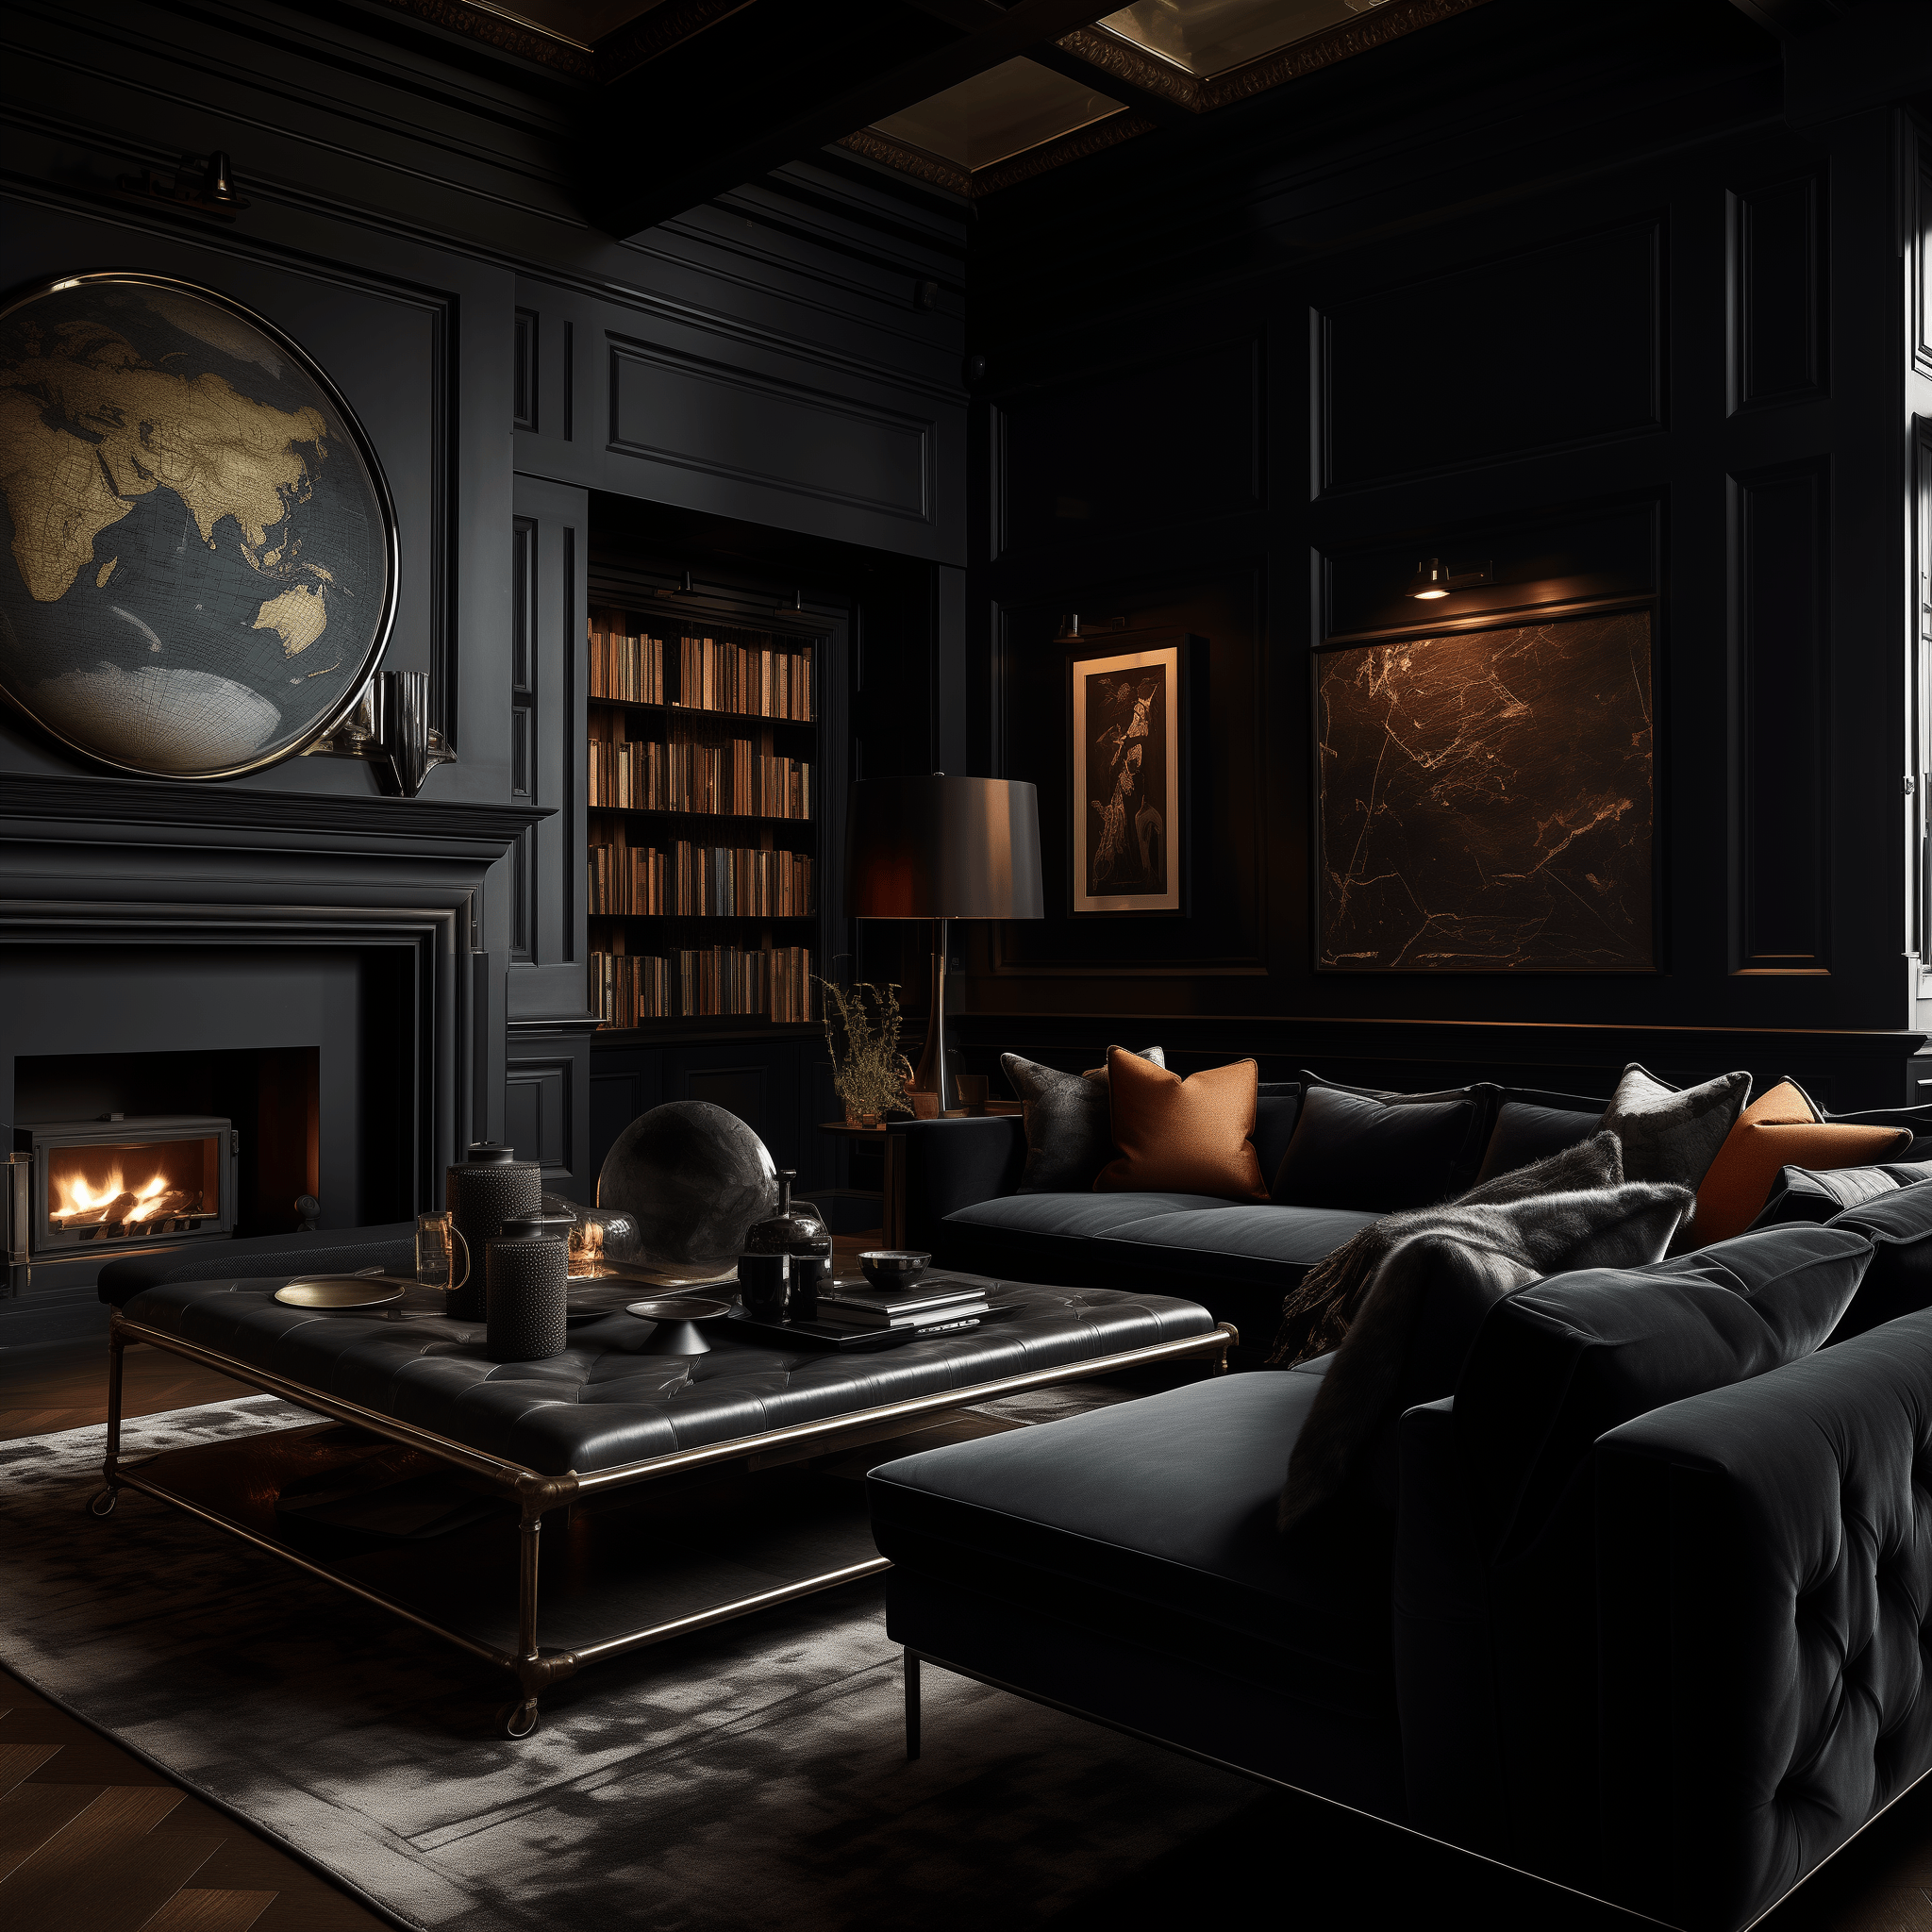 Daylit dark living room captured at eye-level, highlighting the interplay of luxurious textiles and unique wall textures.